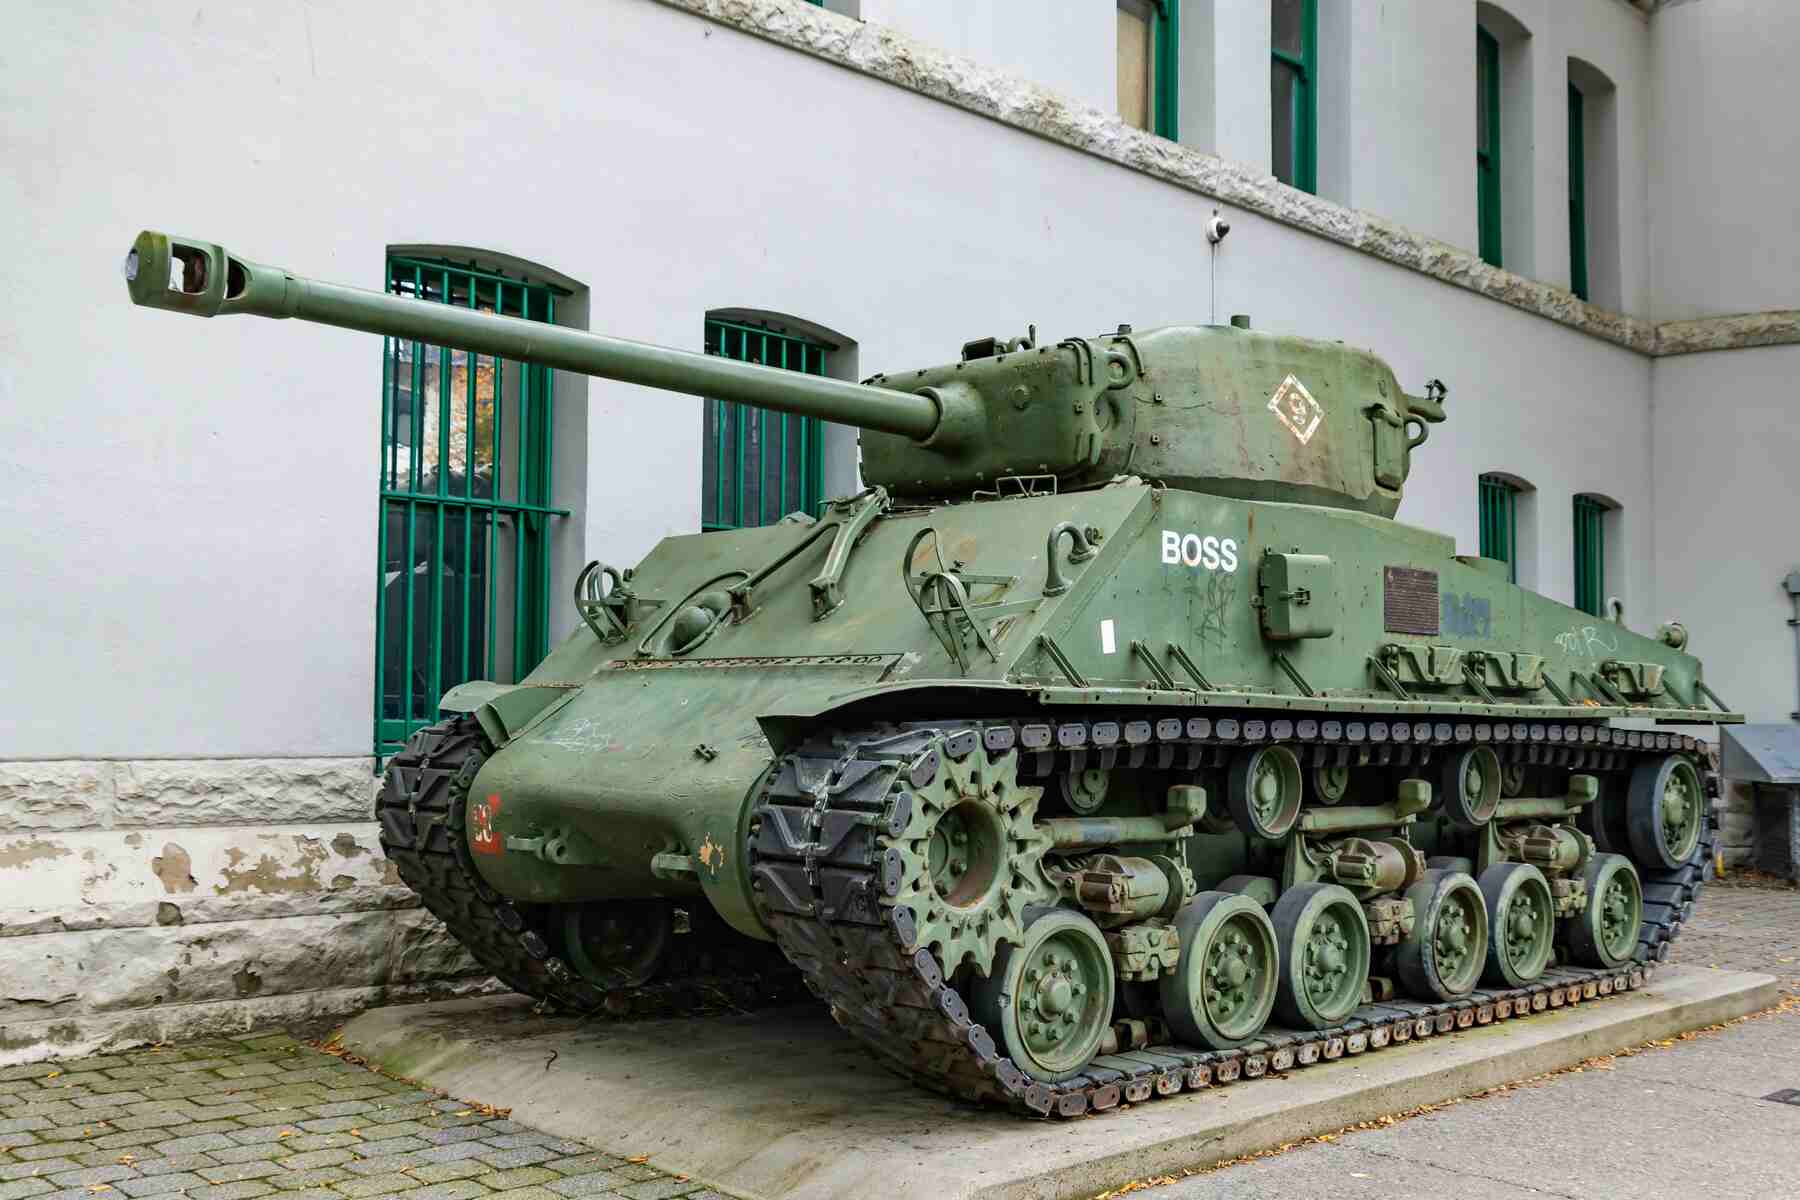 A military tank displayed on a museum